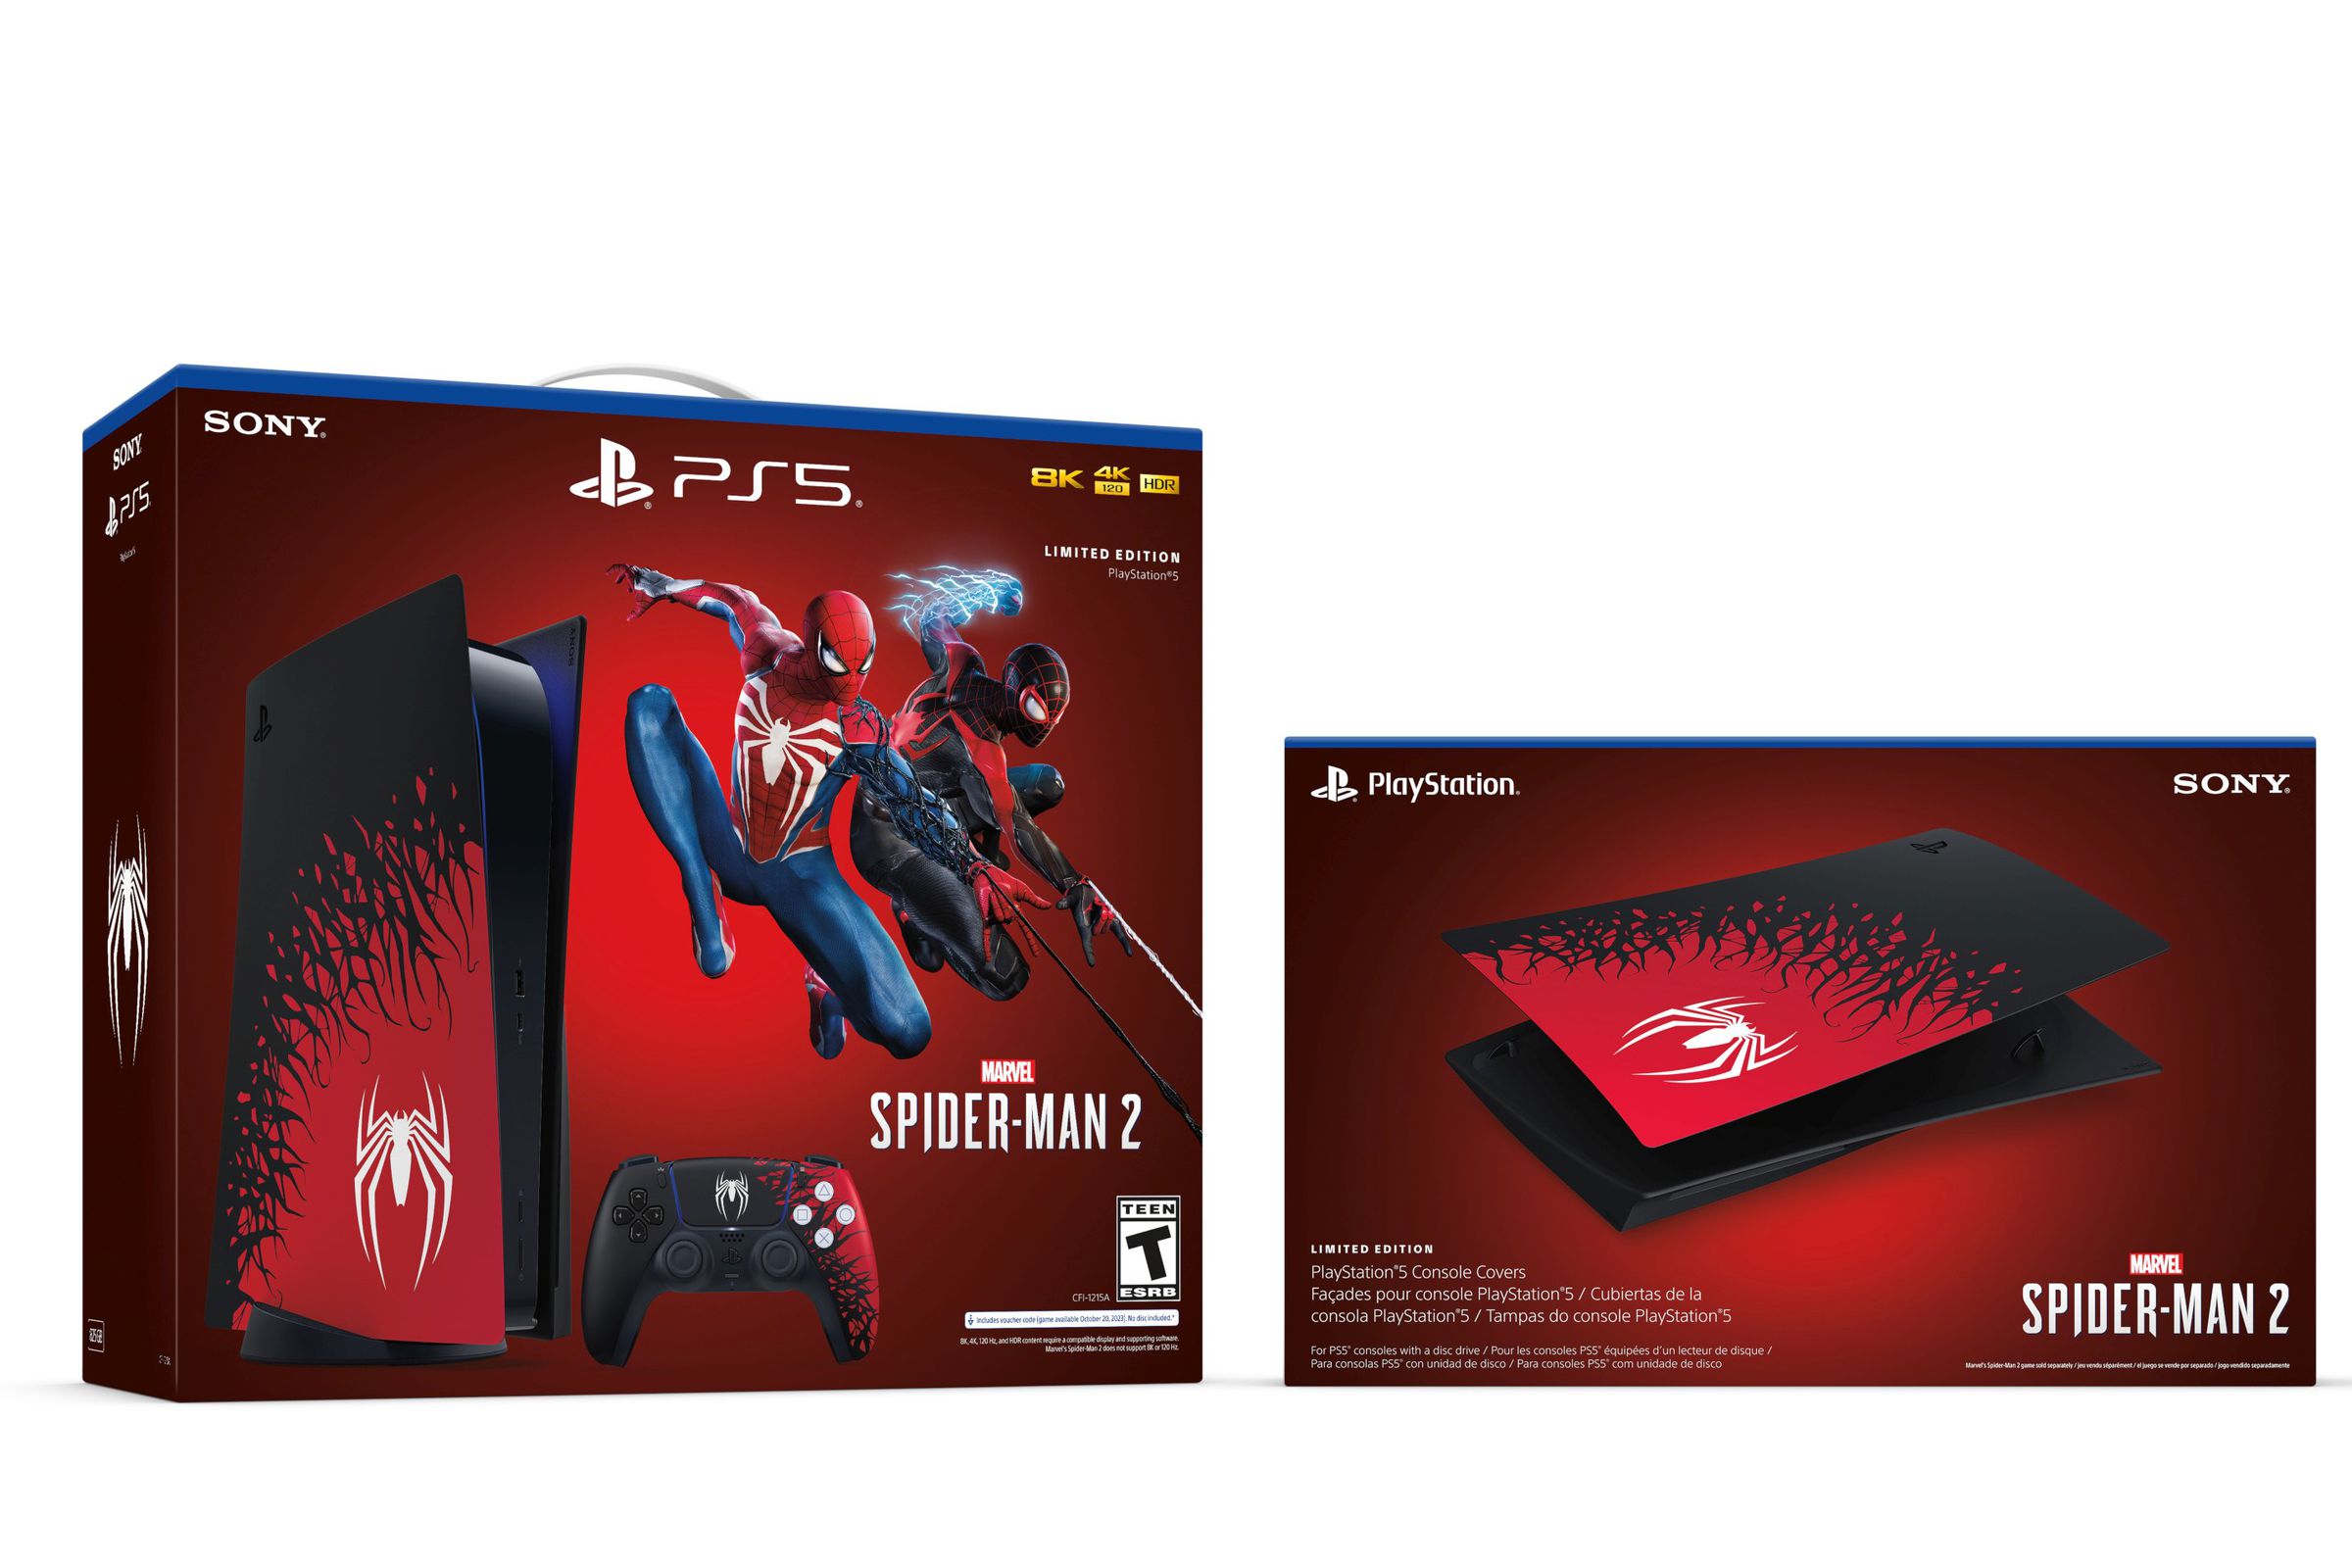 Where to preorder Sony's new Spider-Man PS5 console and